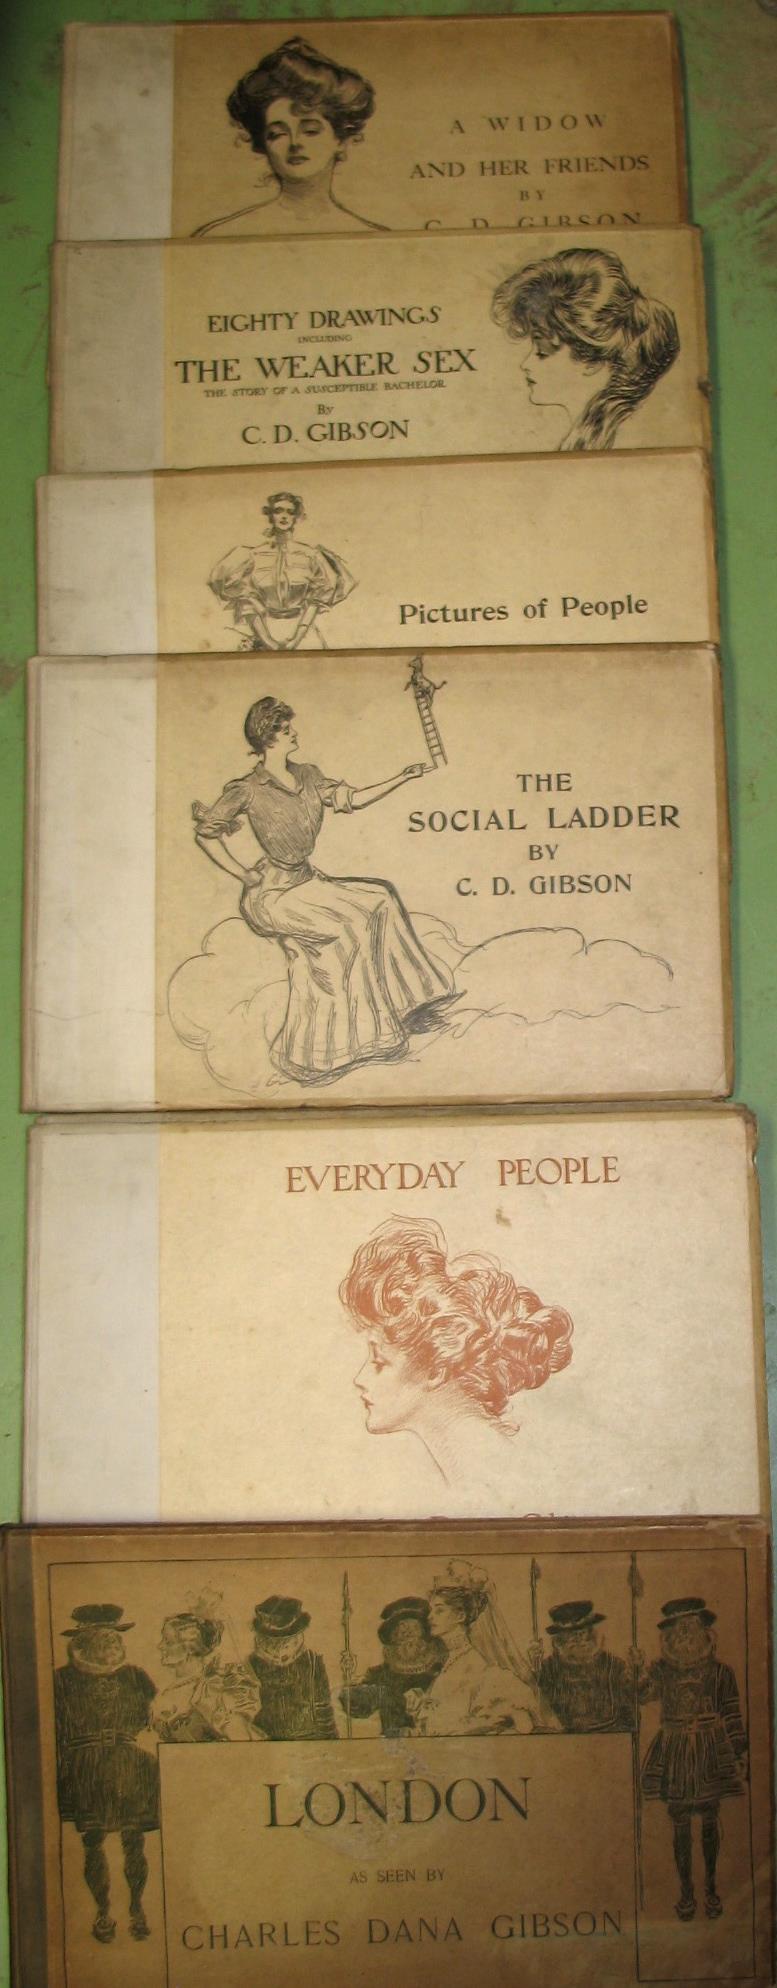 GIBSON (Charles Dana) illustrator; 8 titles, lge obl. 4to, illus., cloth-backed pictorial boards,